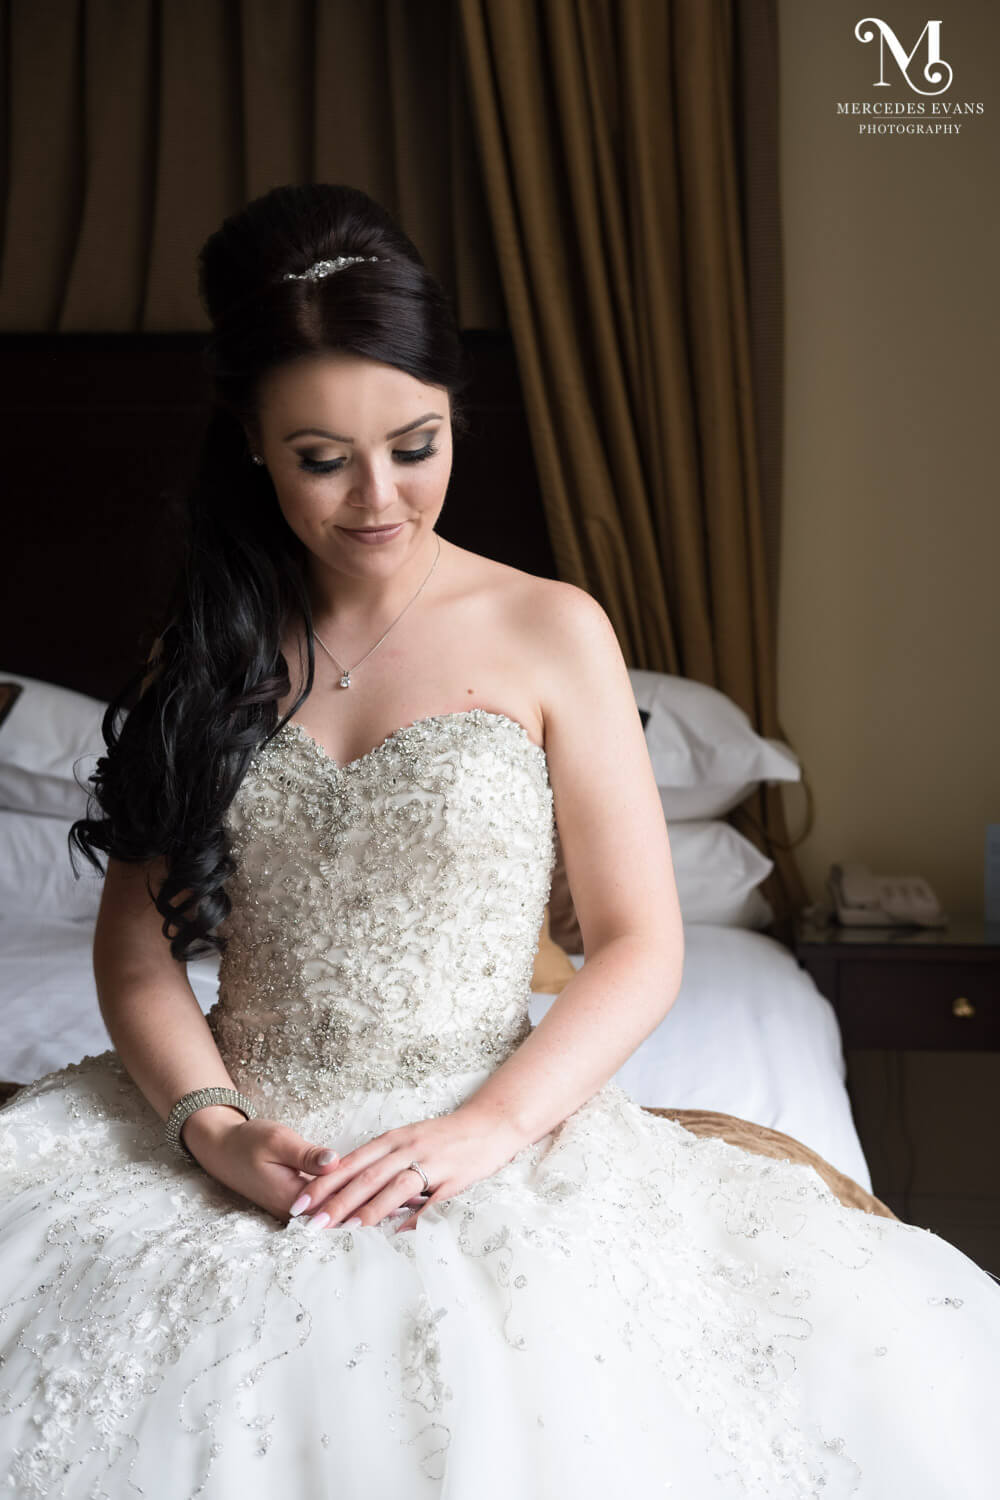 The bride sits on the bed and admires her wedding ring